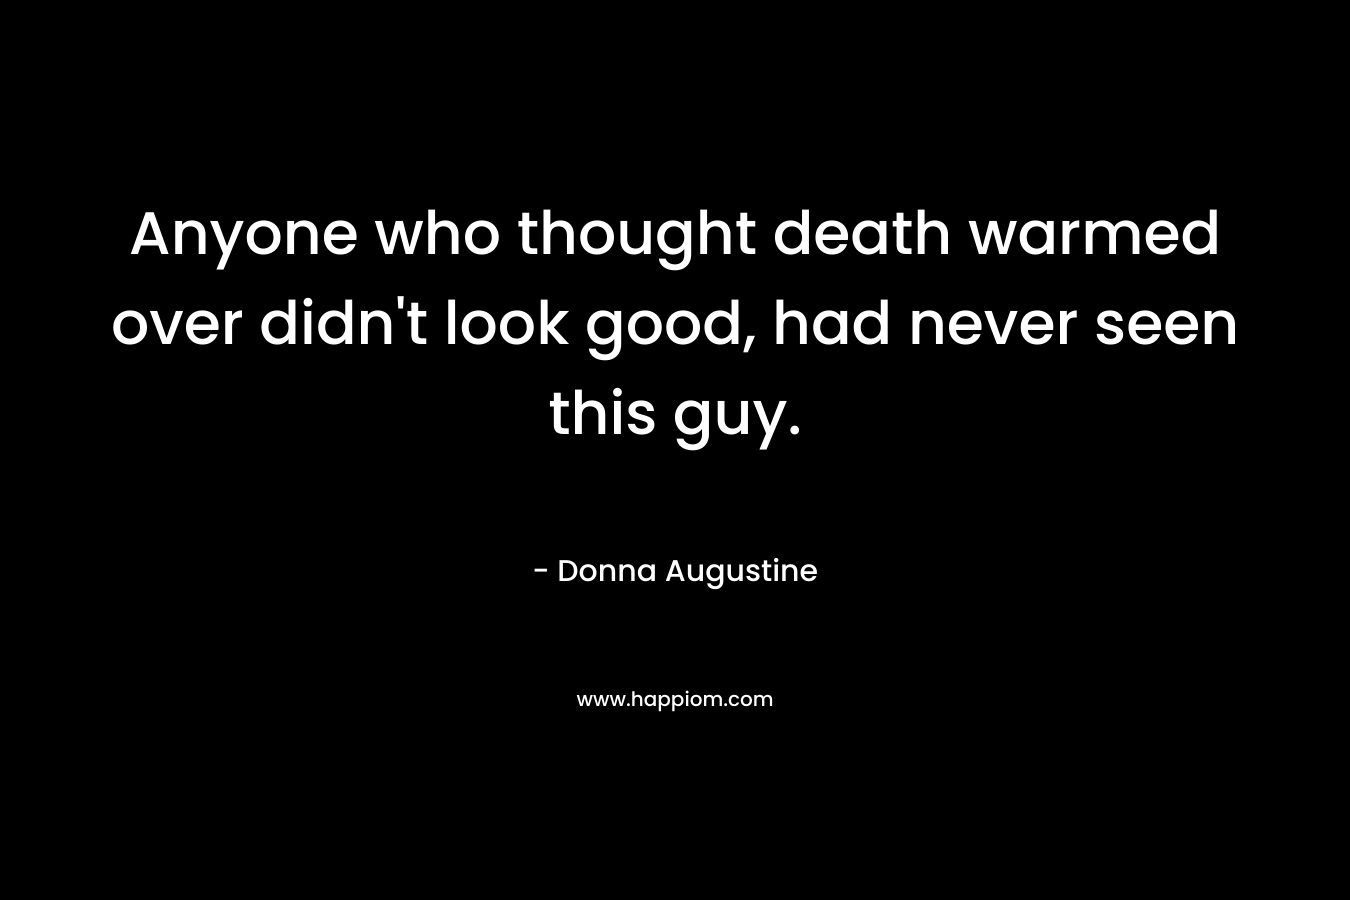 Anyone who thought death warmed over didn’t look good, had never seen this guy. – Donna Augustine